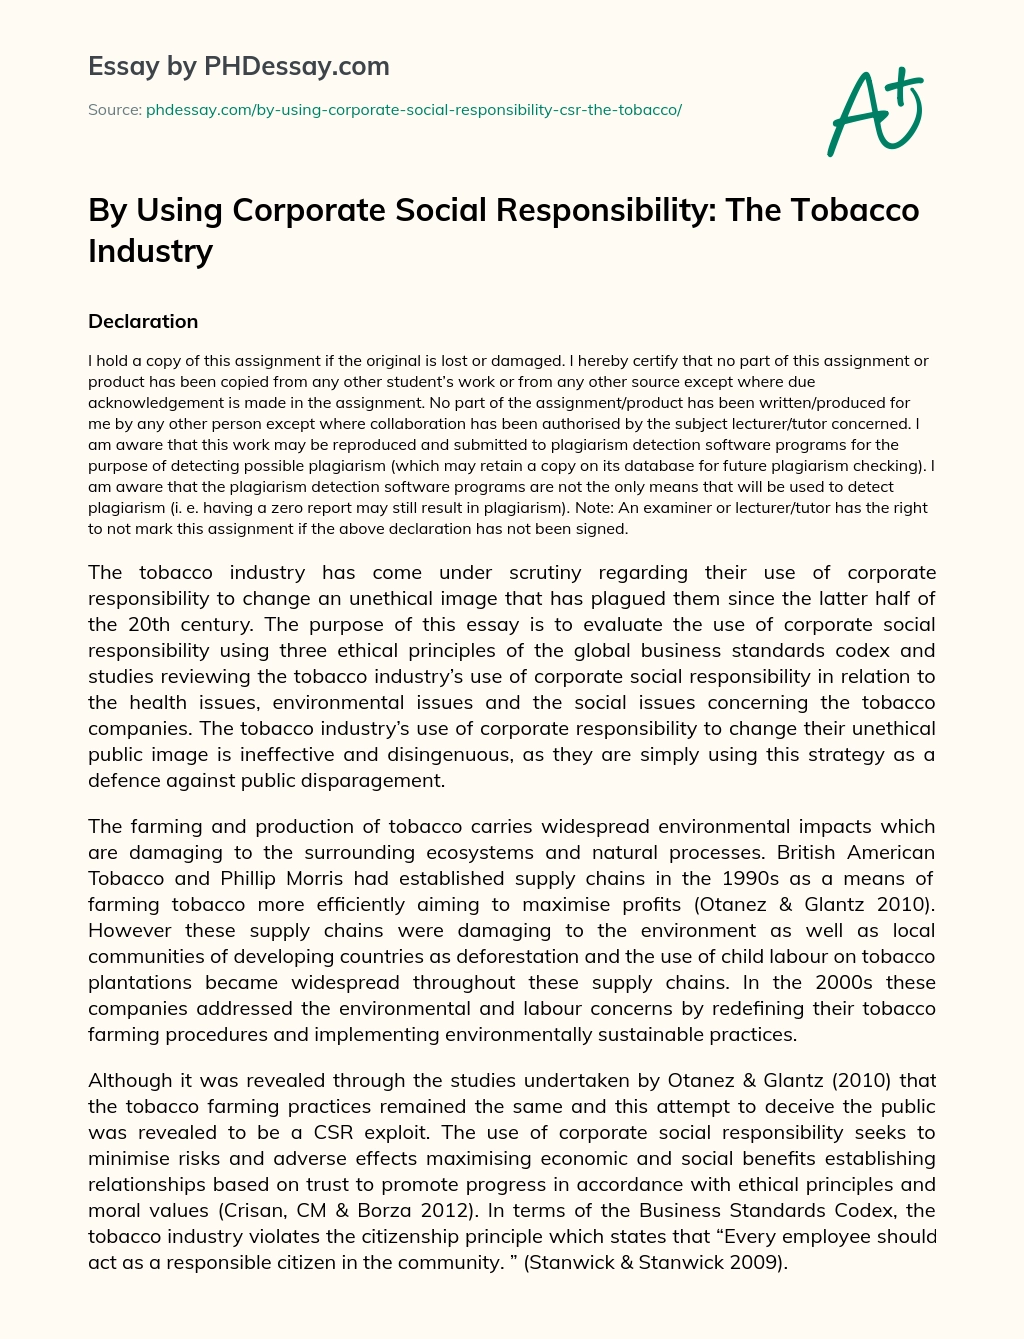 tobacco industry corporate social responsibility essay